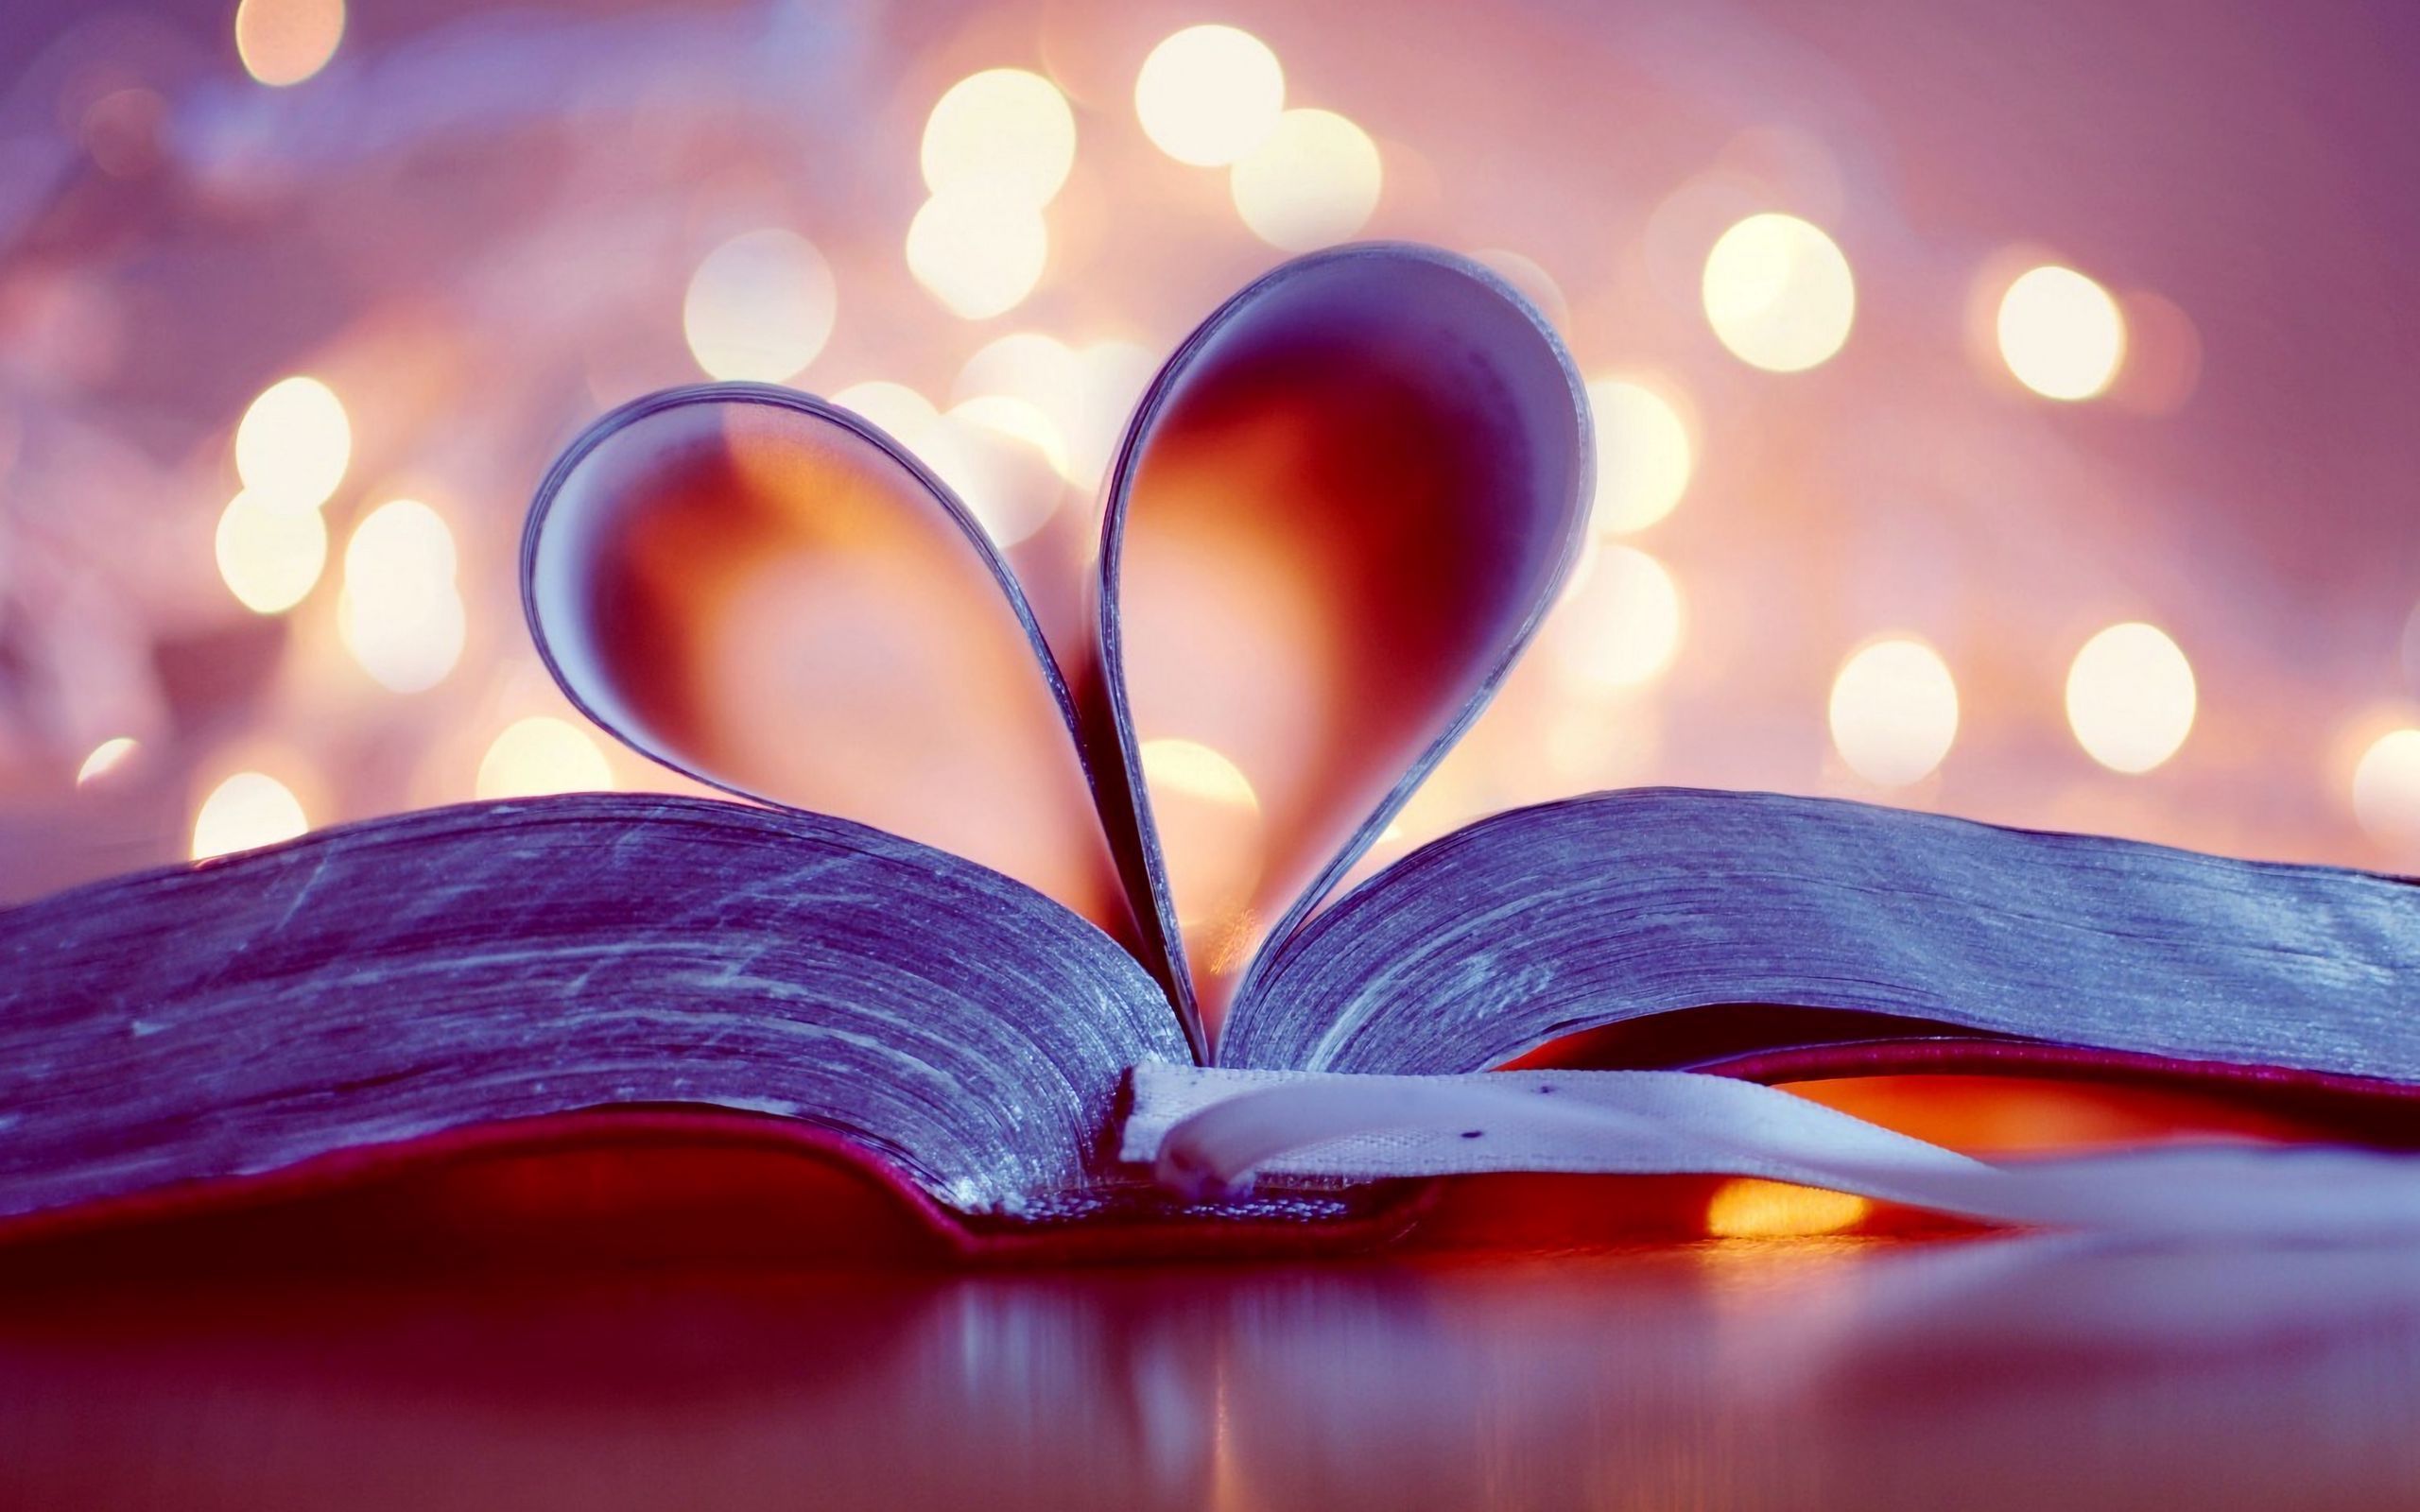 Download wallpaper 2560x1600 book, heart, page, glare, bookmark widescreen 16:10 HD background